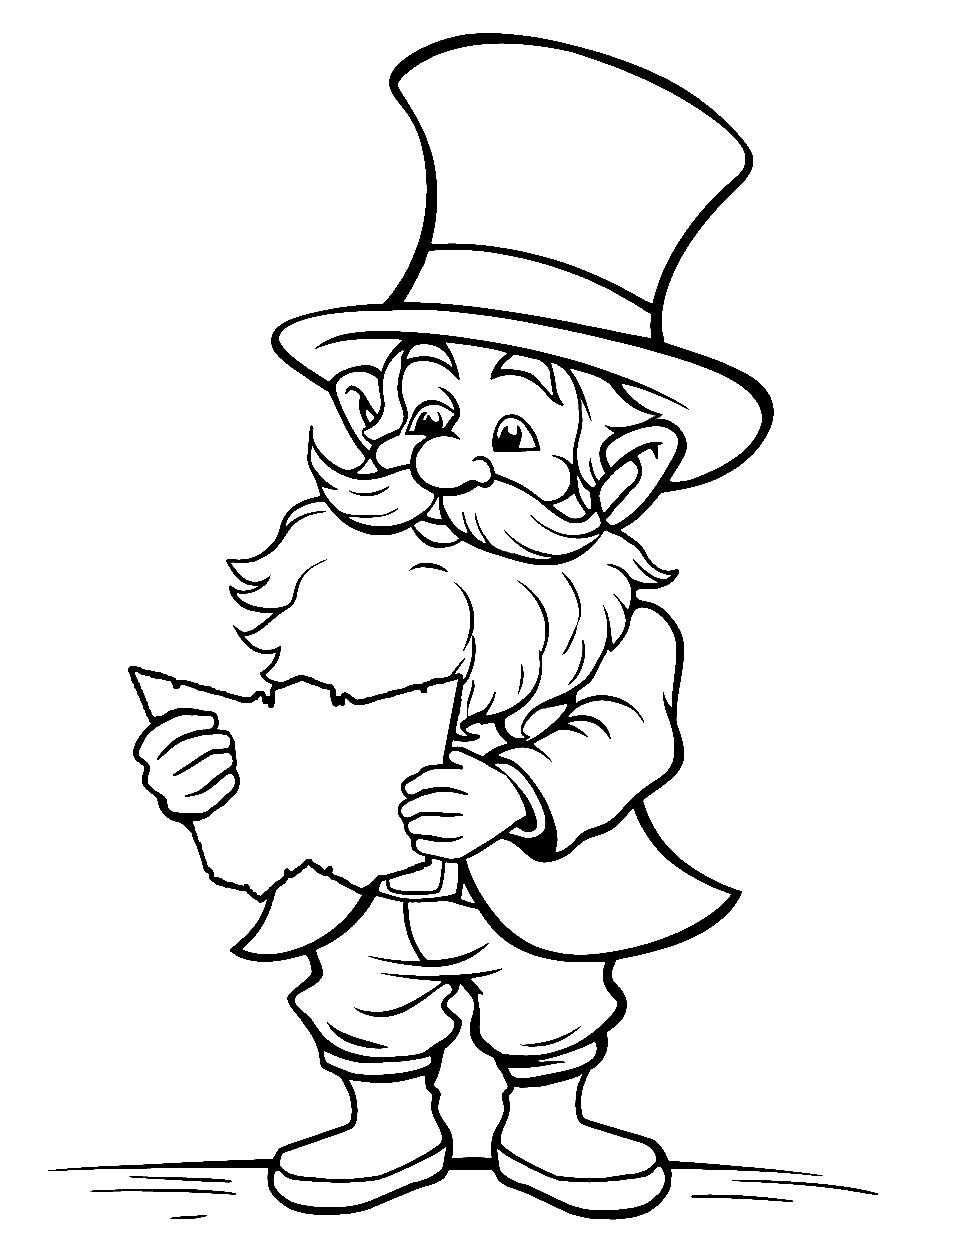 Elderly Leprechaun Reading a Map Coloring Page - An elderly leprechaun intently studying a treasure map.